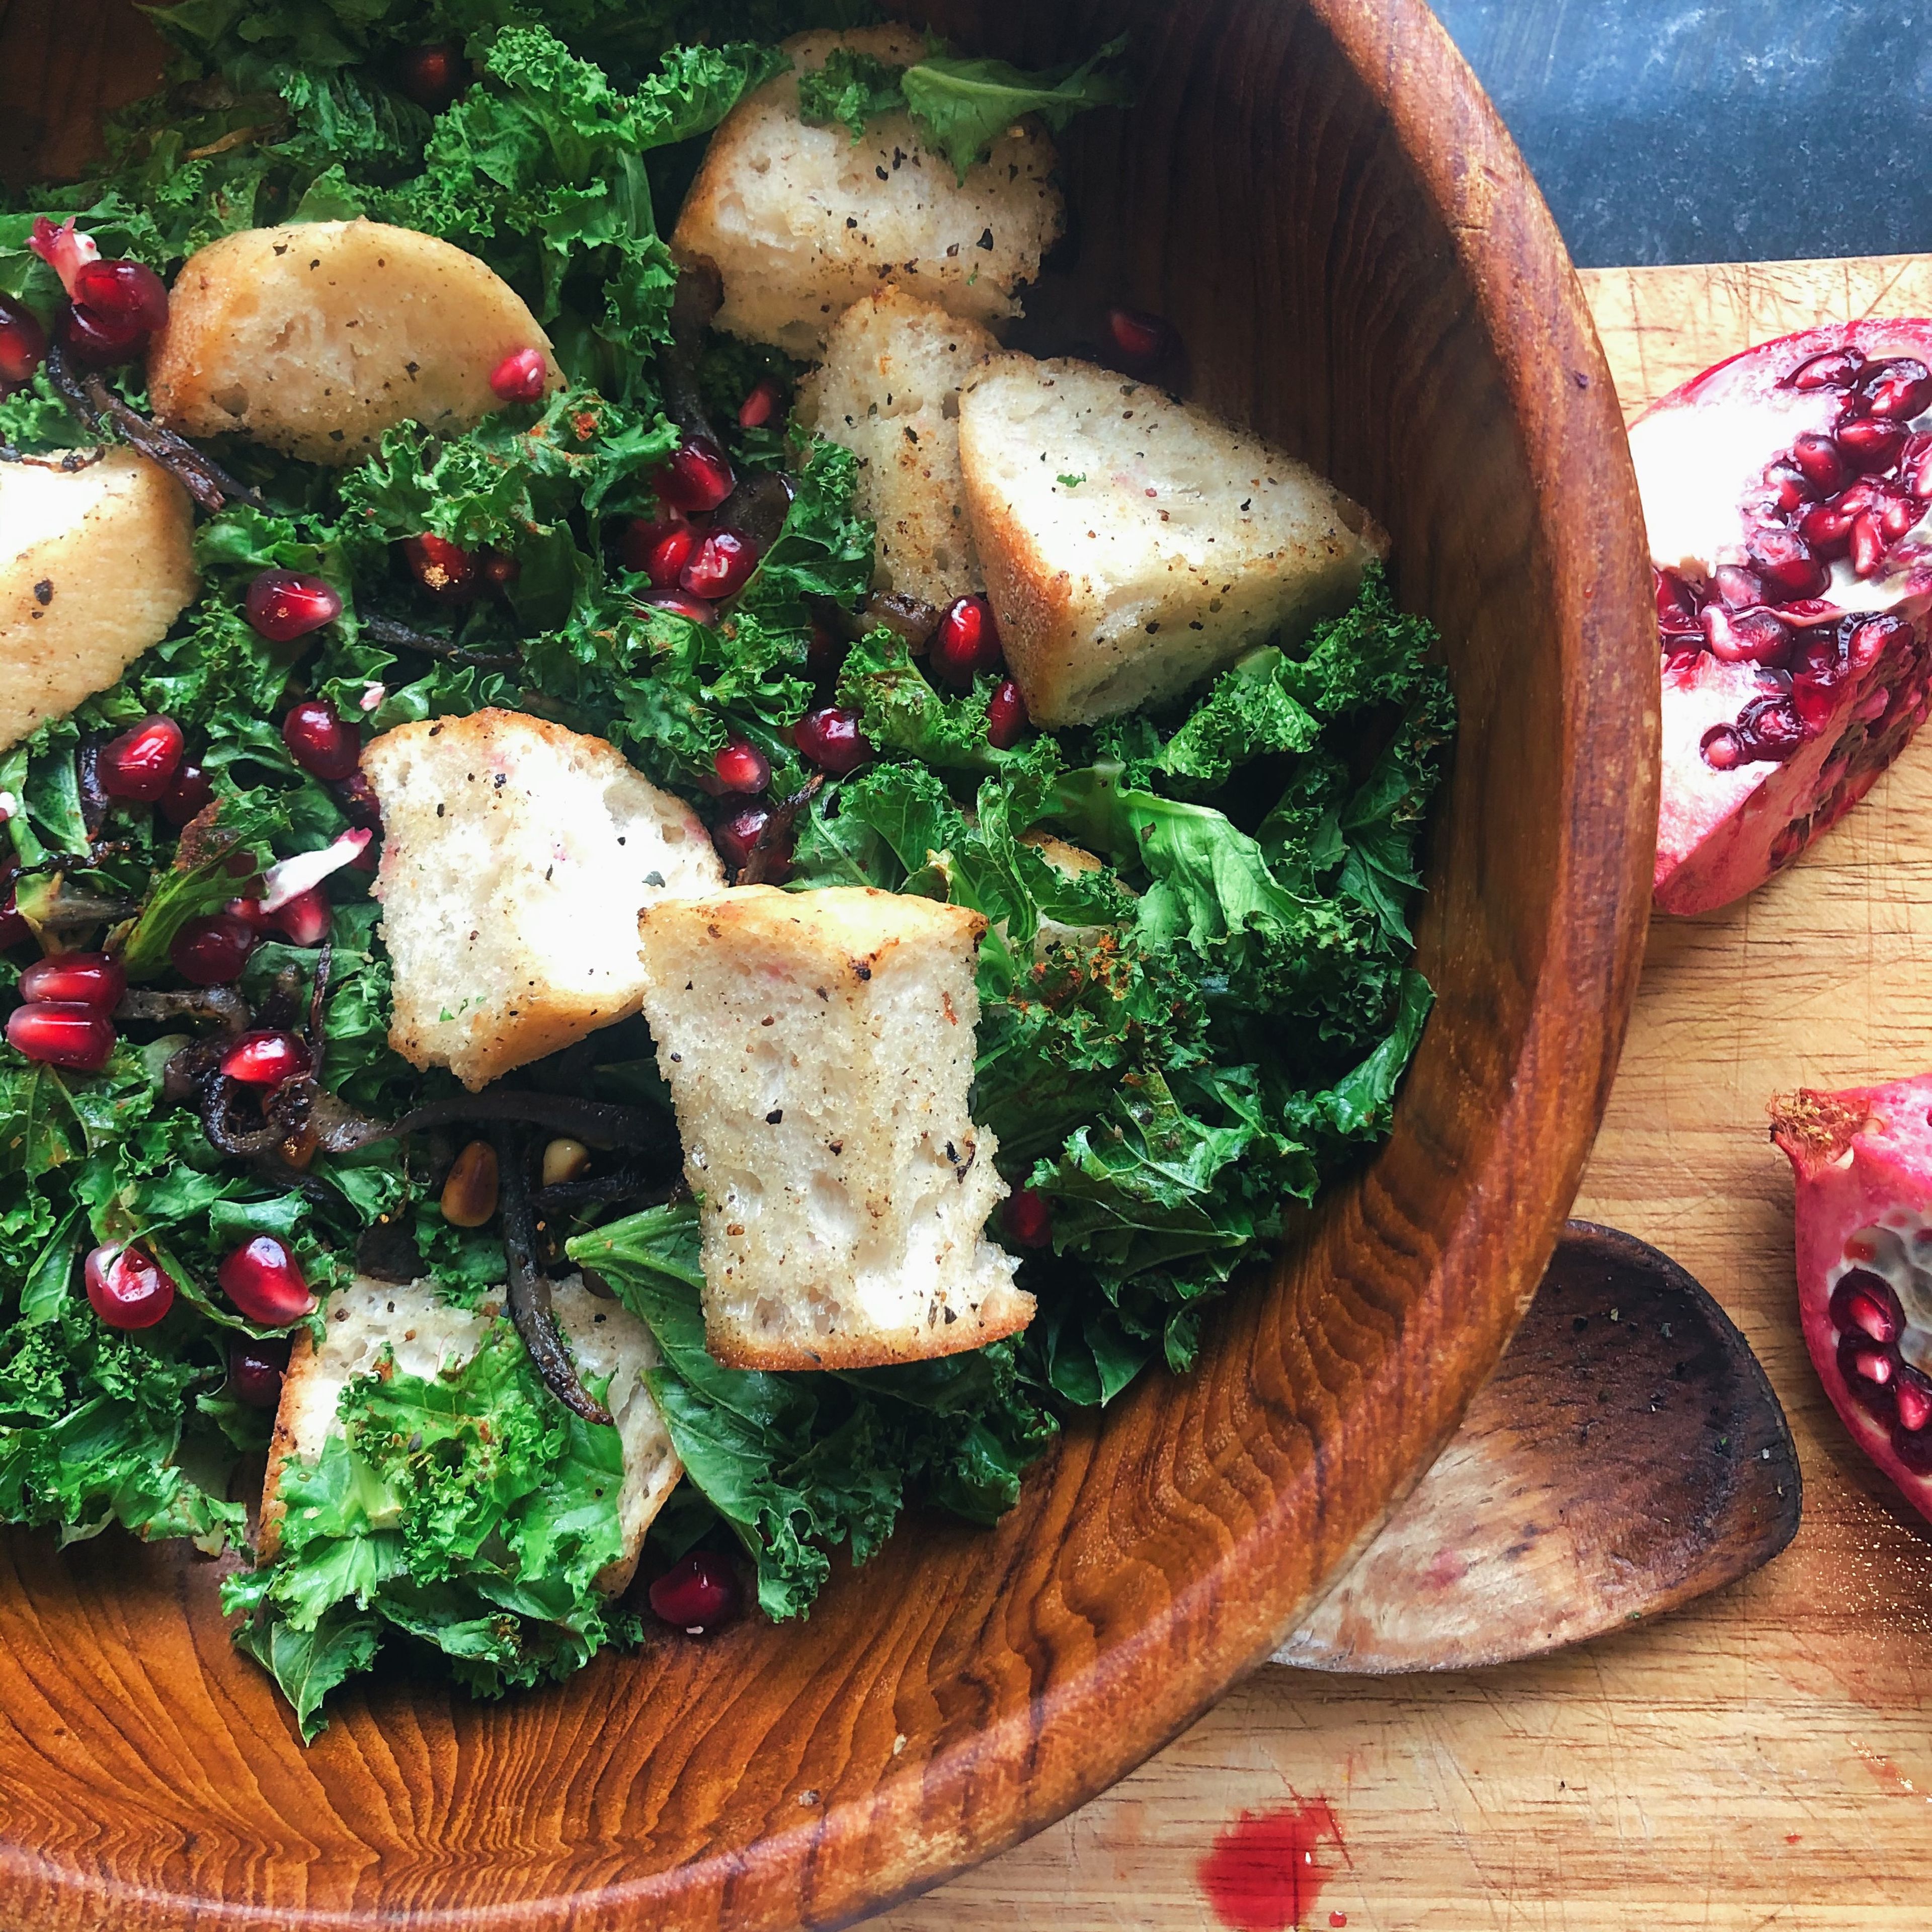 Add kale and bread mix to a bowl and sprinkle pomegranate seeds over the top.